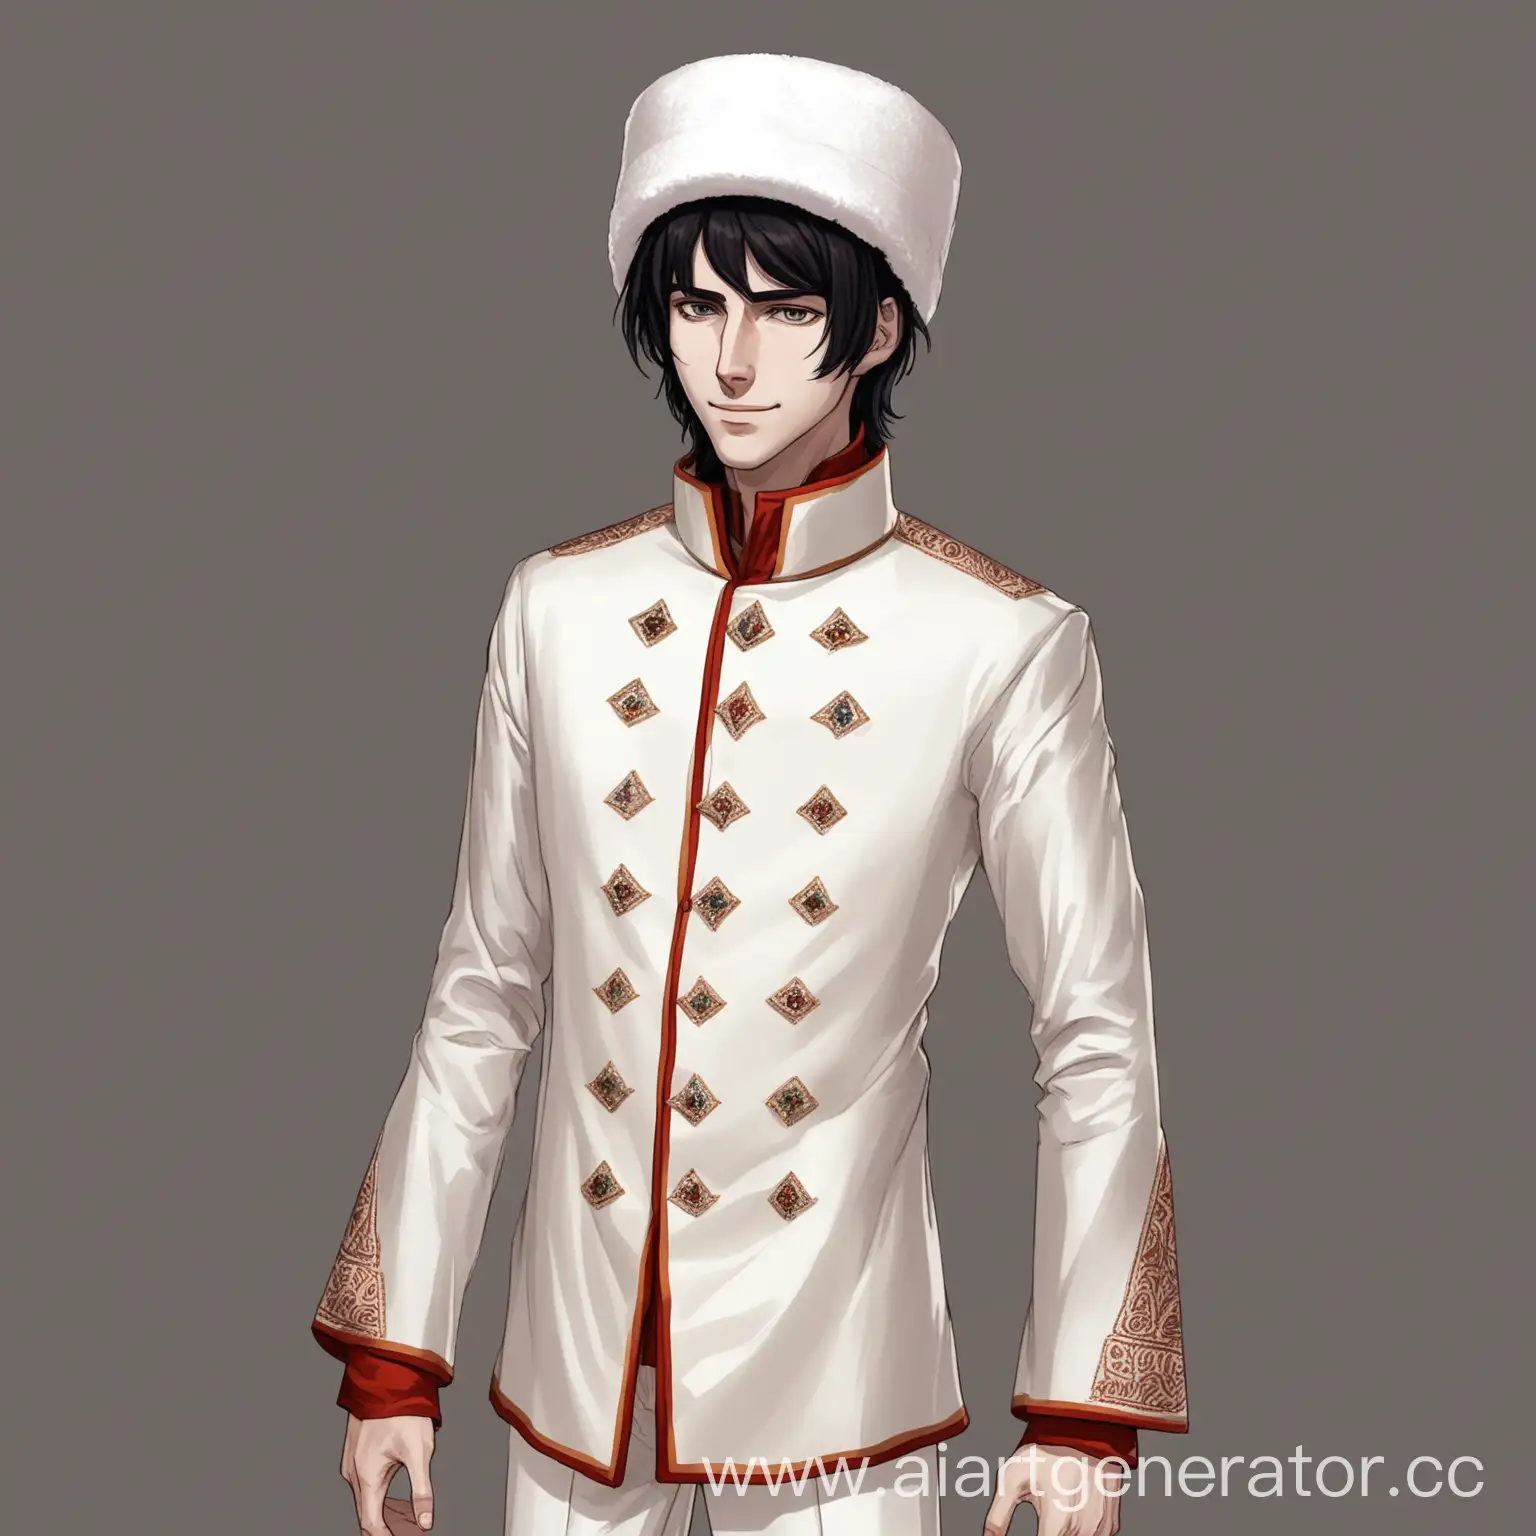 Tall-Slender-Man-in-Black-Shirt-and-Red-Boots-with-White-Ushanka